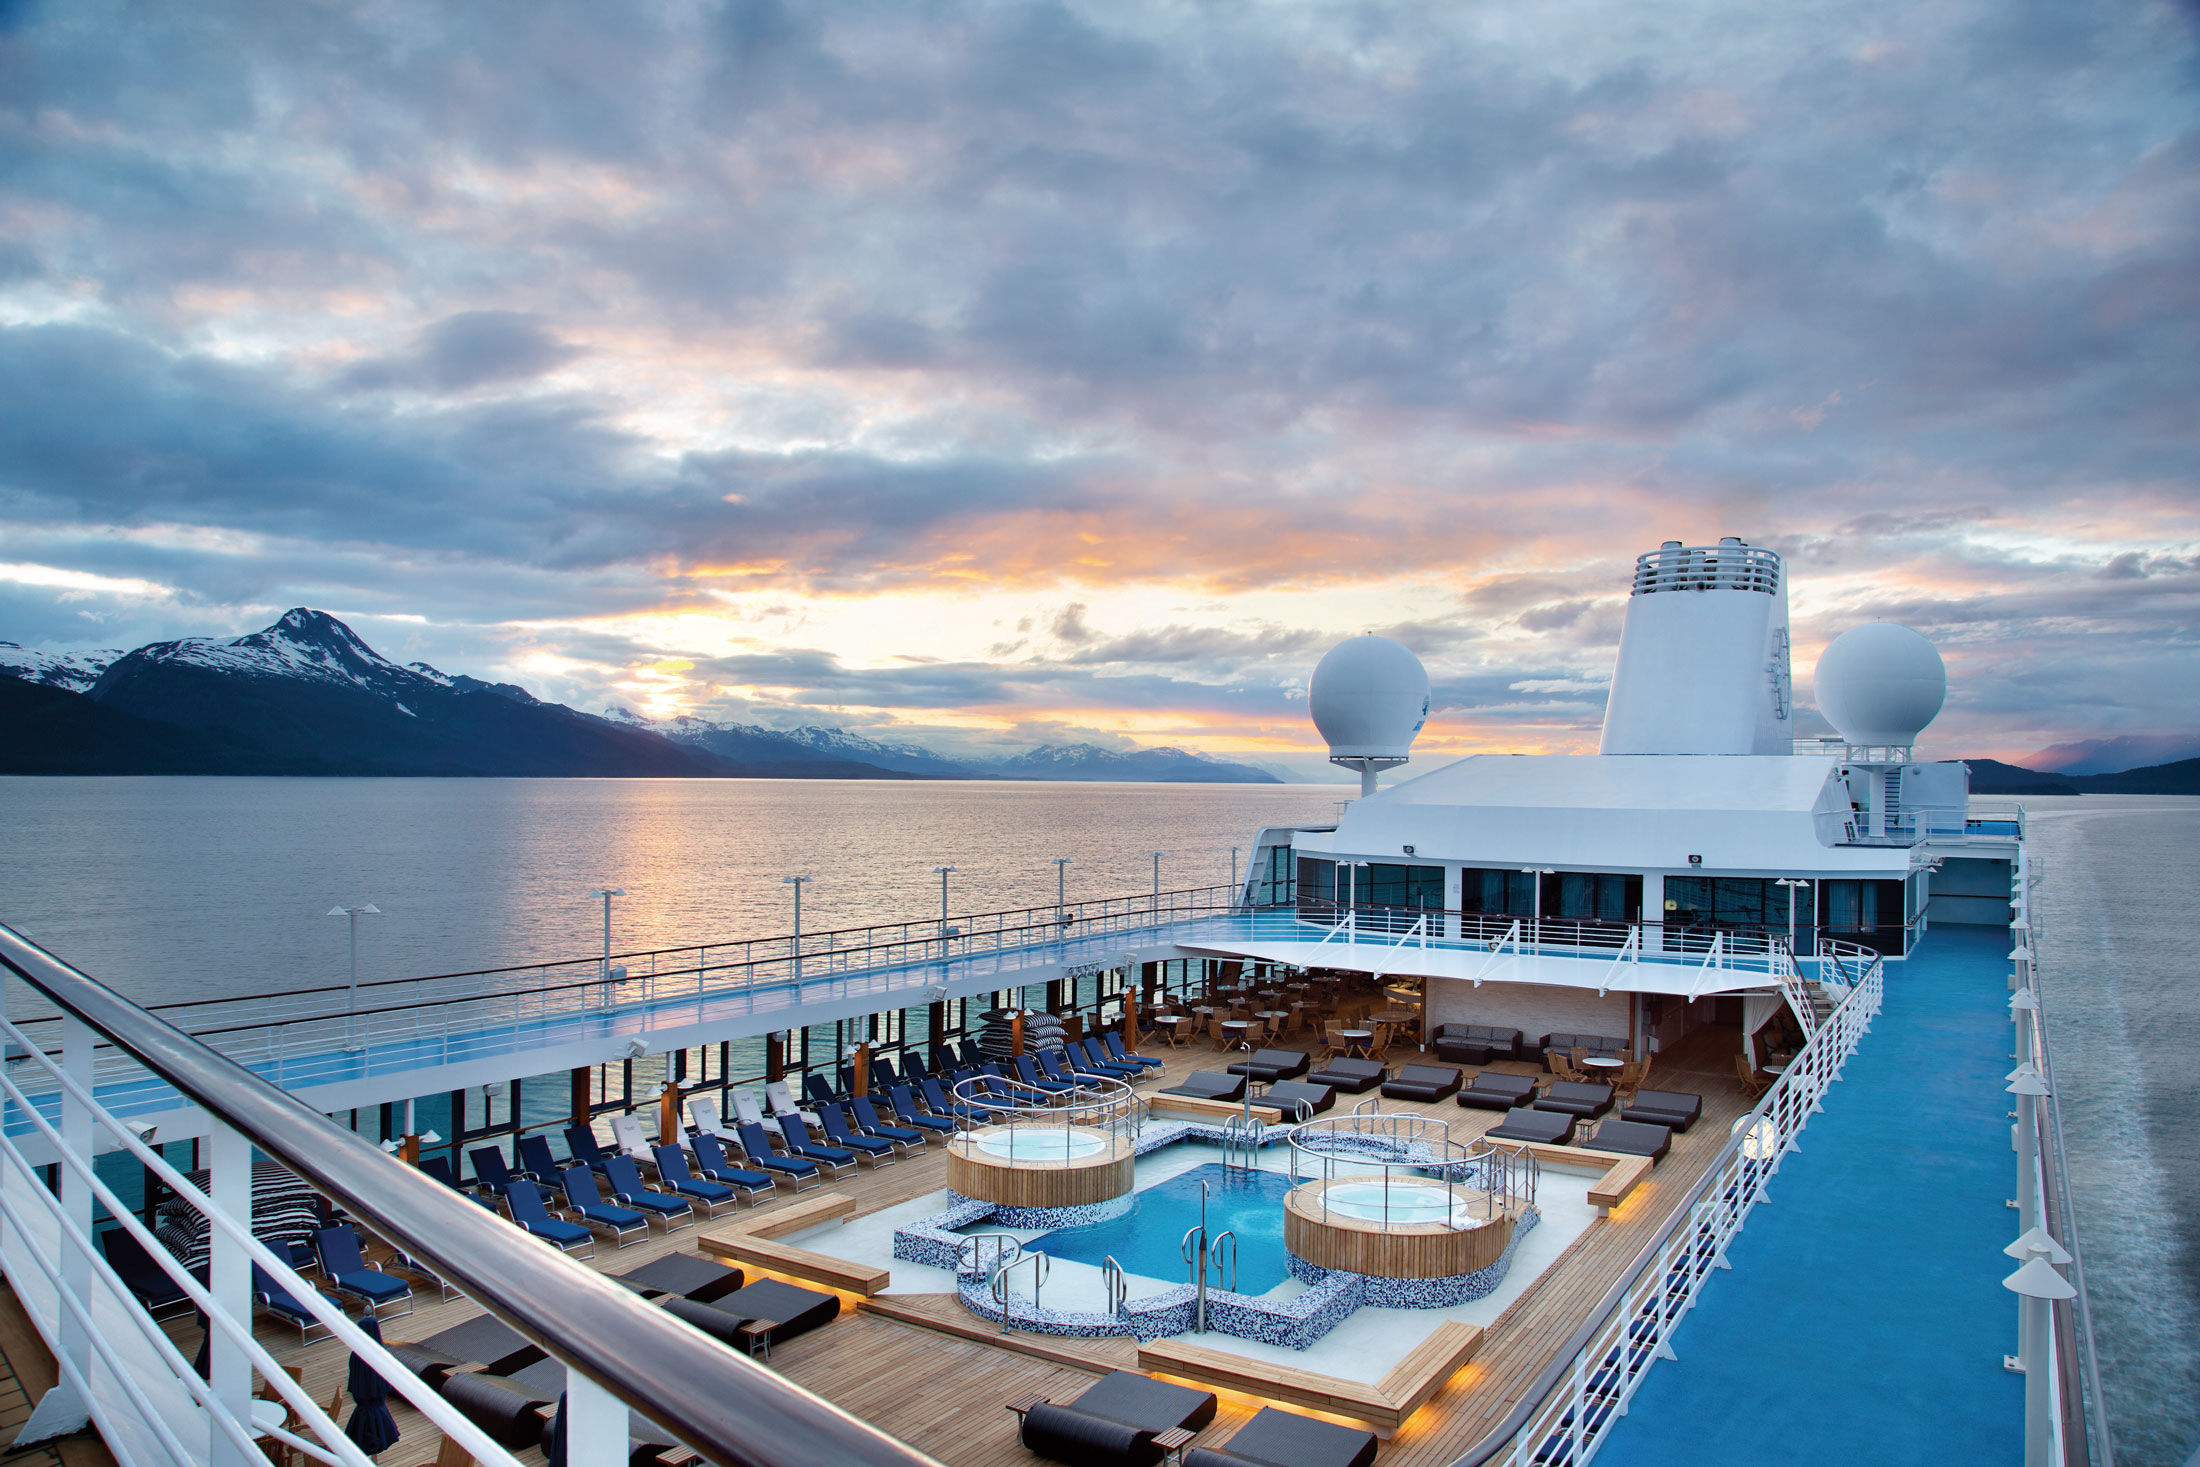 The ultimate cruise experience